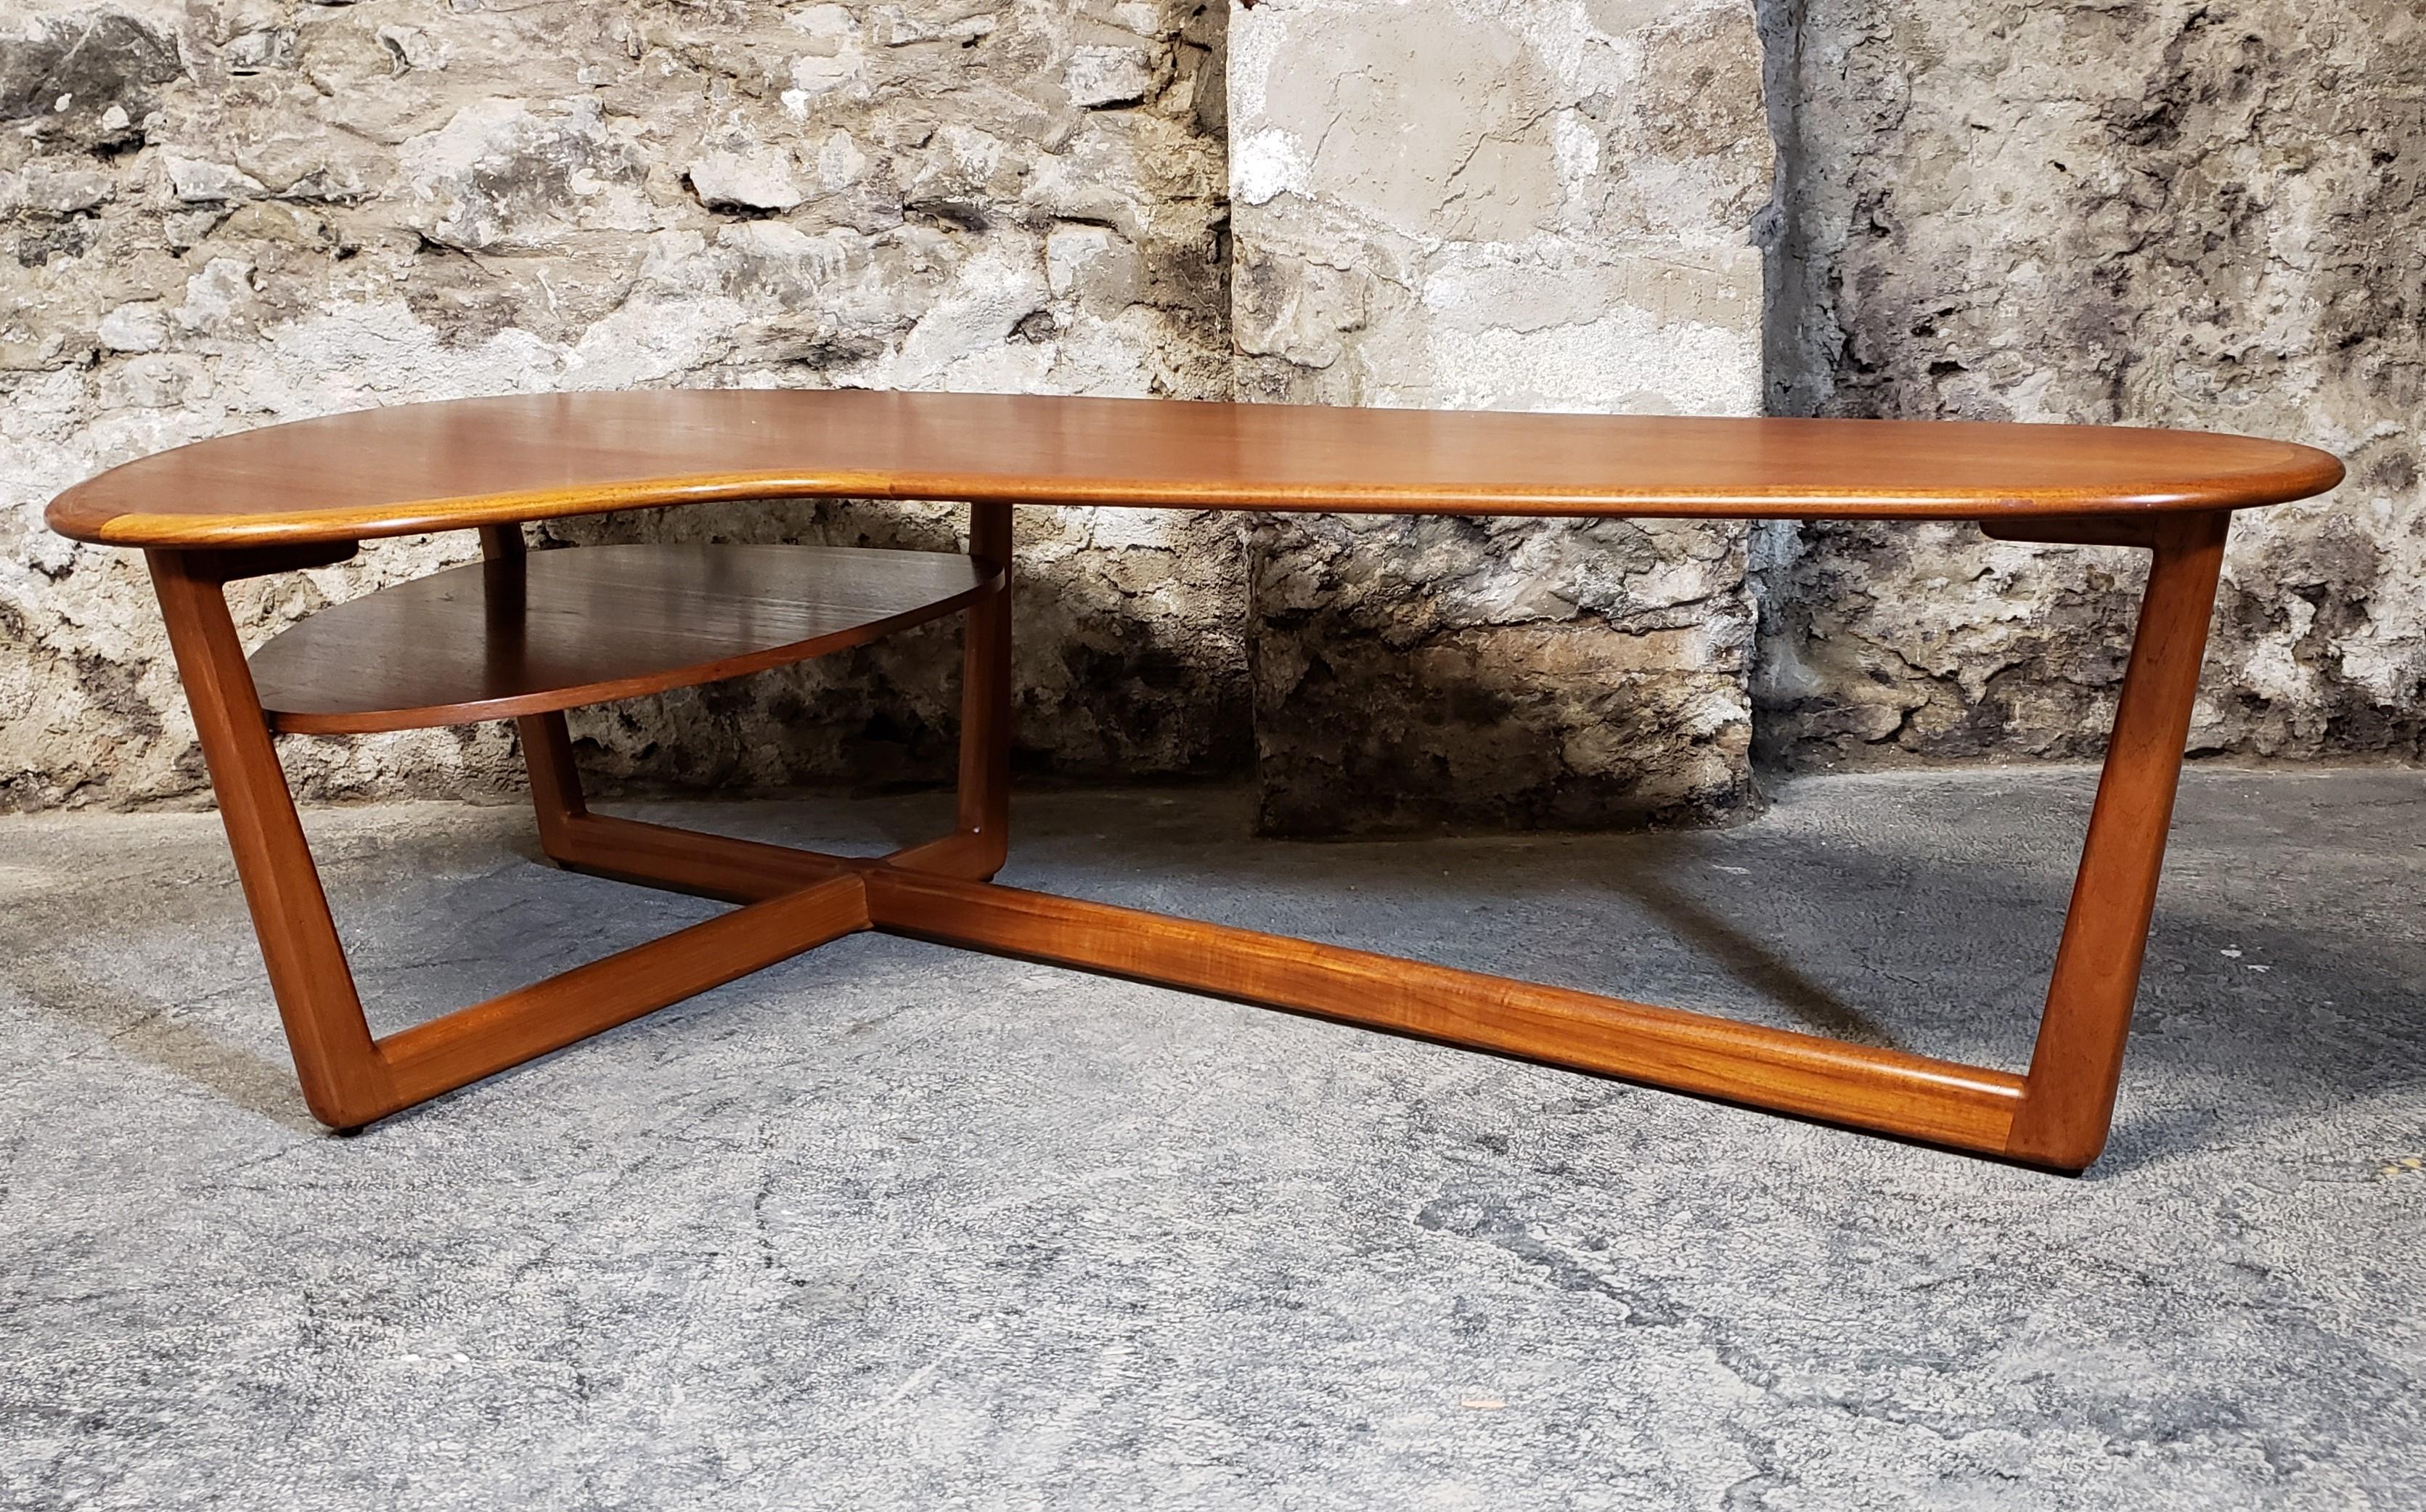 Gorgeously sculpted teak boomerang coffee table. Mid-Century Modern take on this classic design shape. It features a beautiful rich patina from aged teak wood, rounded solid teak edges and a floating magazine rack or shelf underneath. The